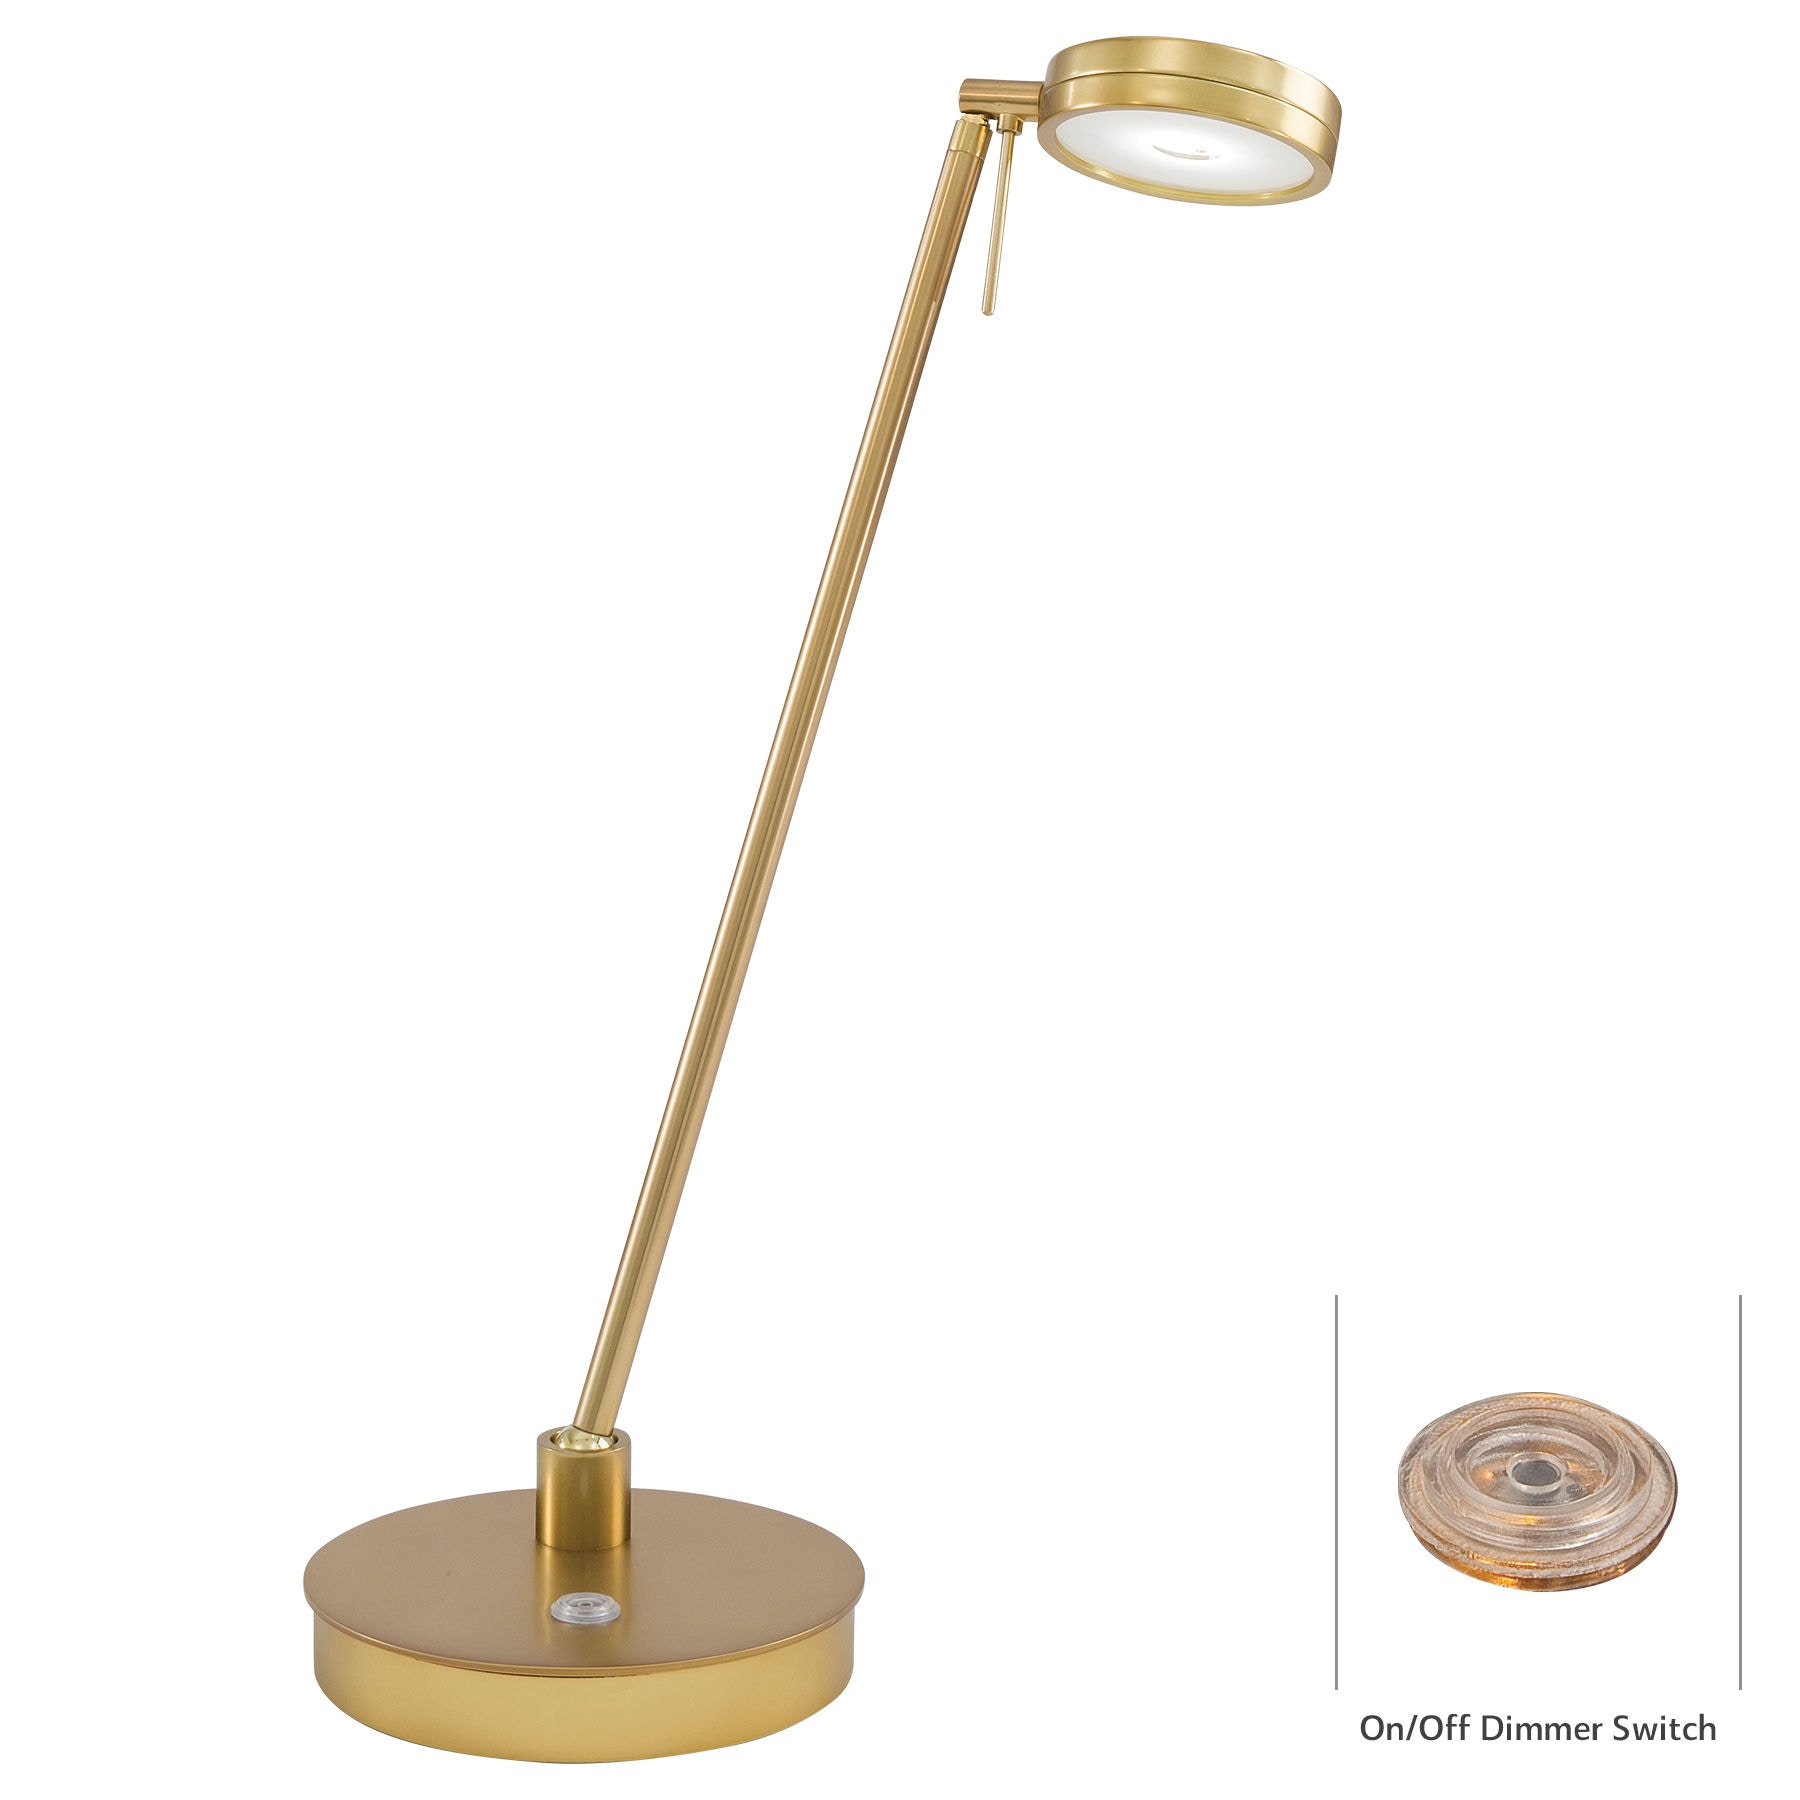 george home lamps